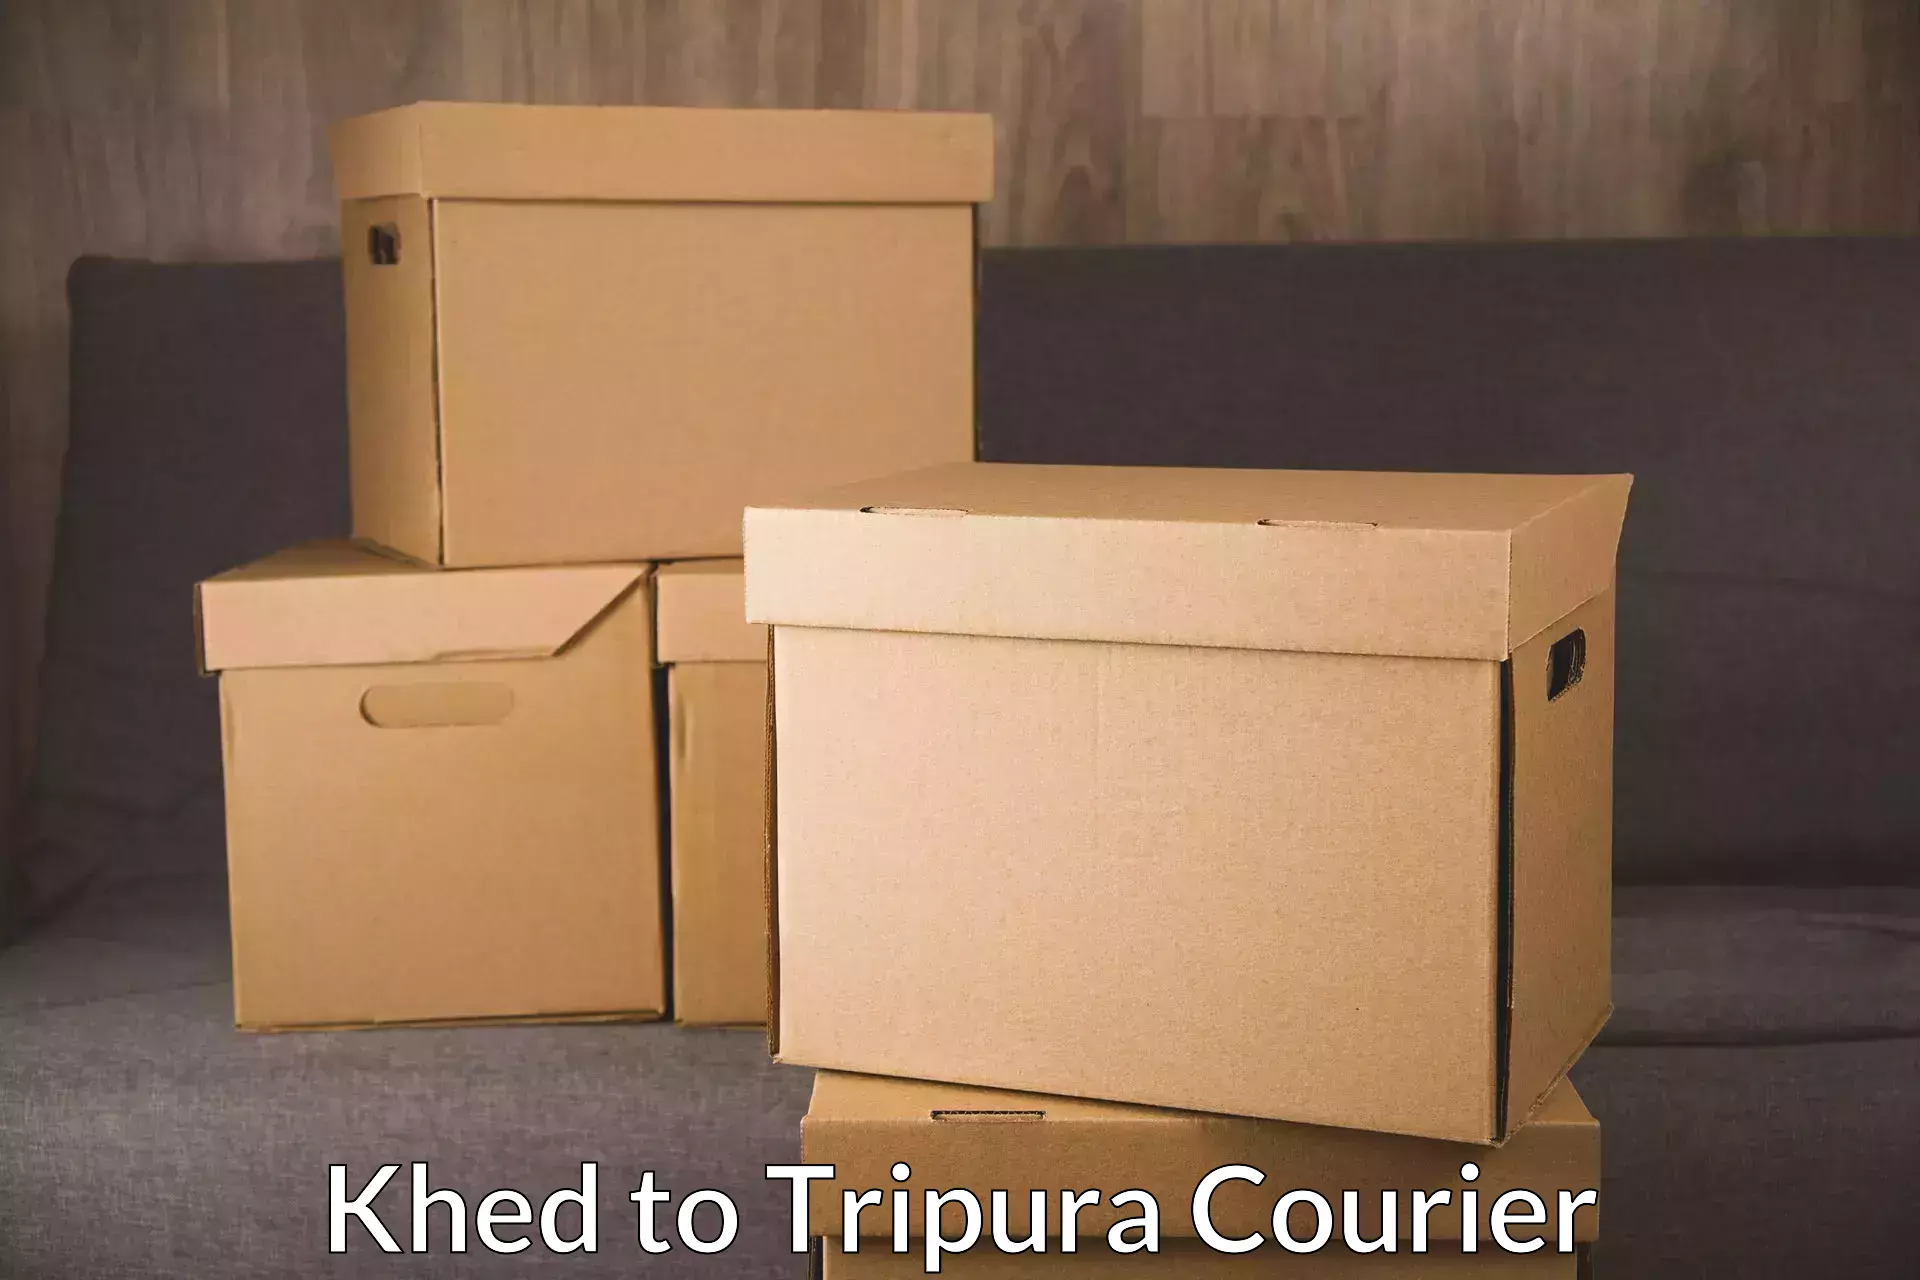 Efficient order fulfillment Khed to Udaipur Tripura